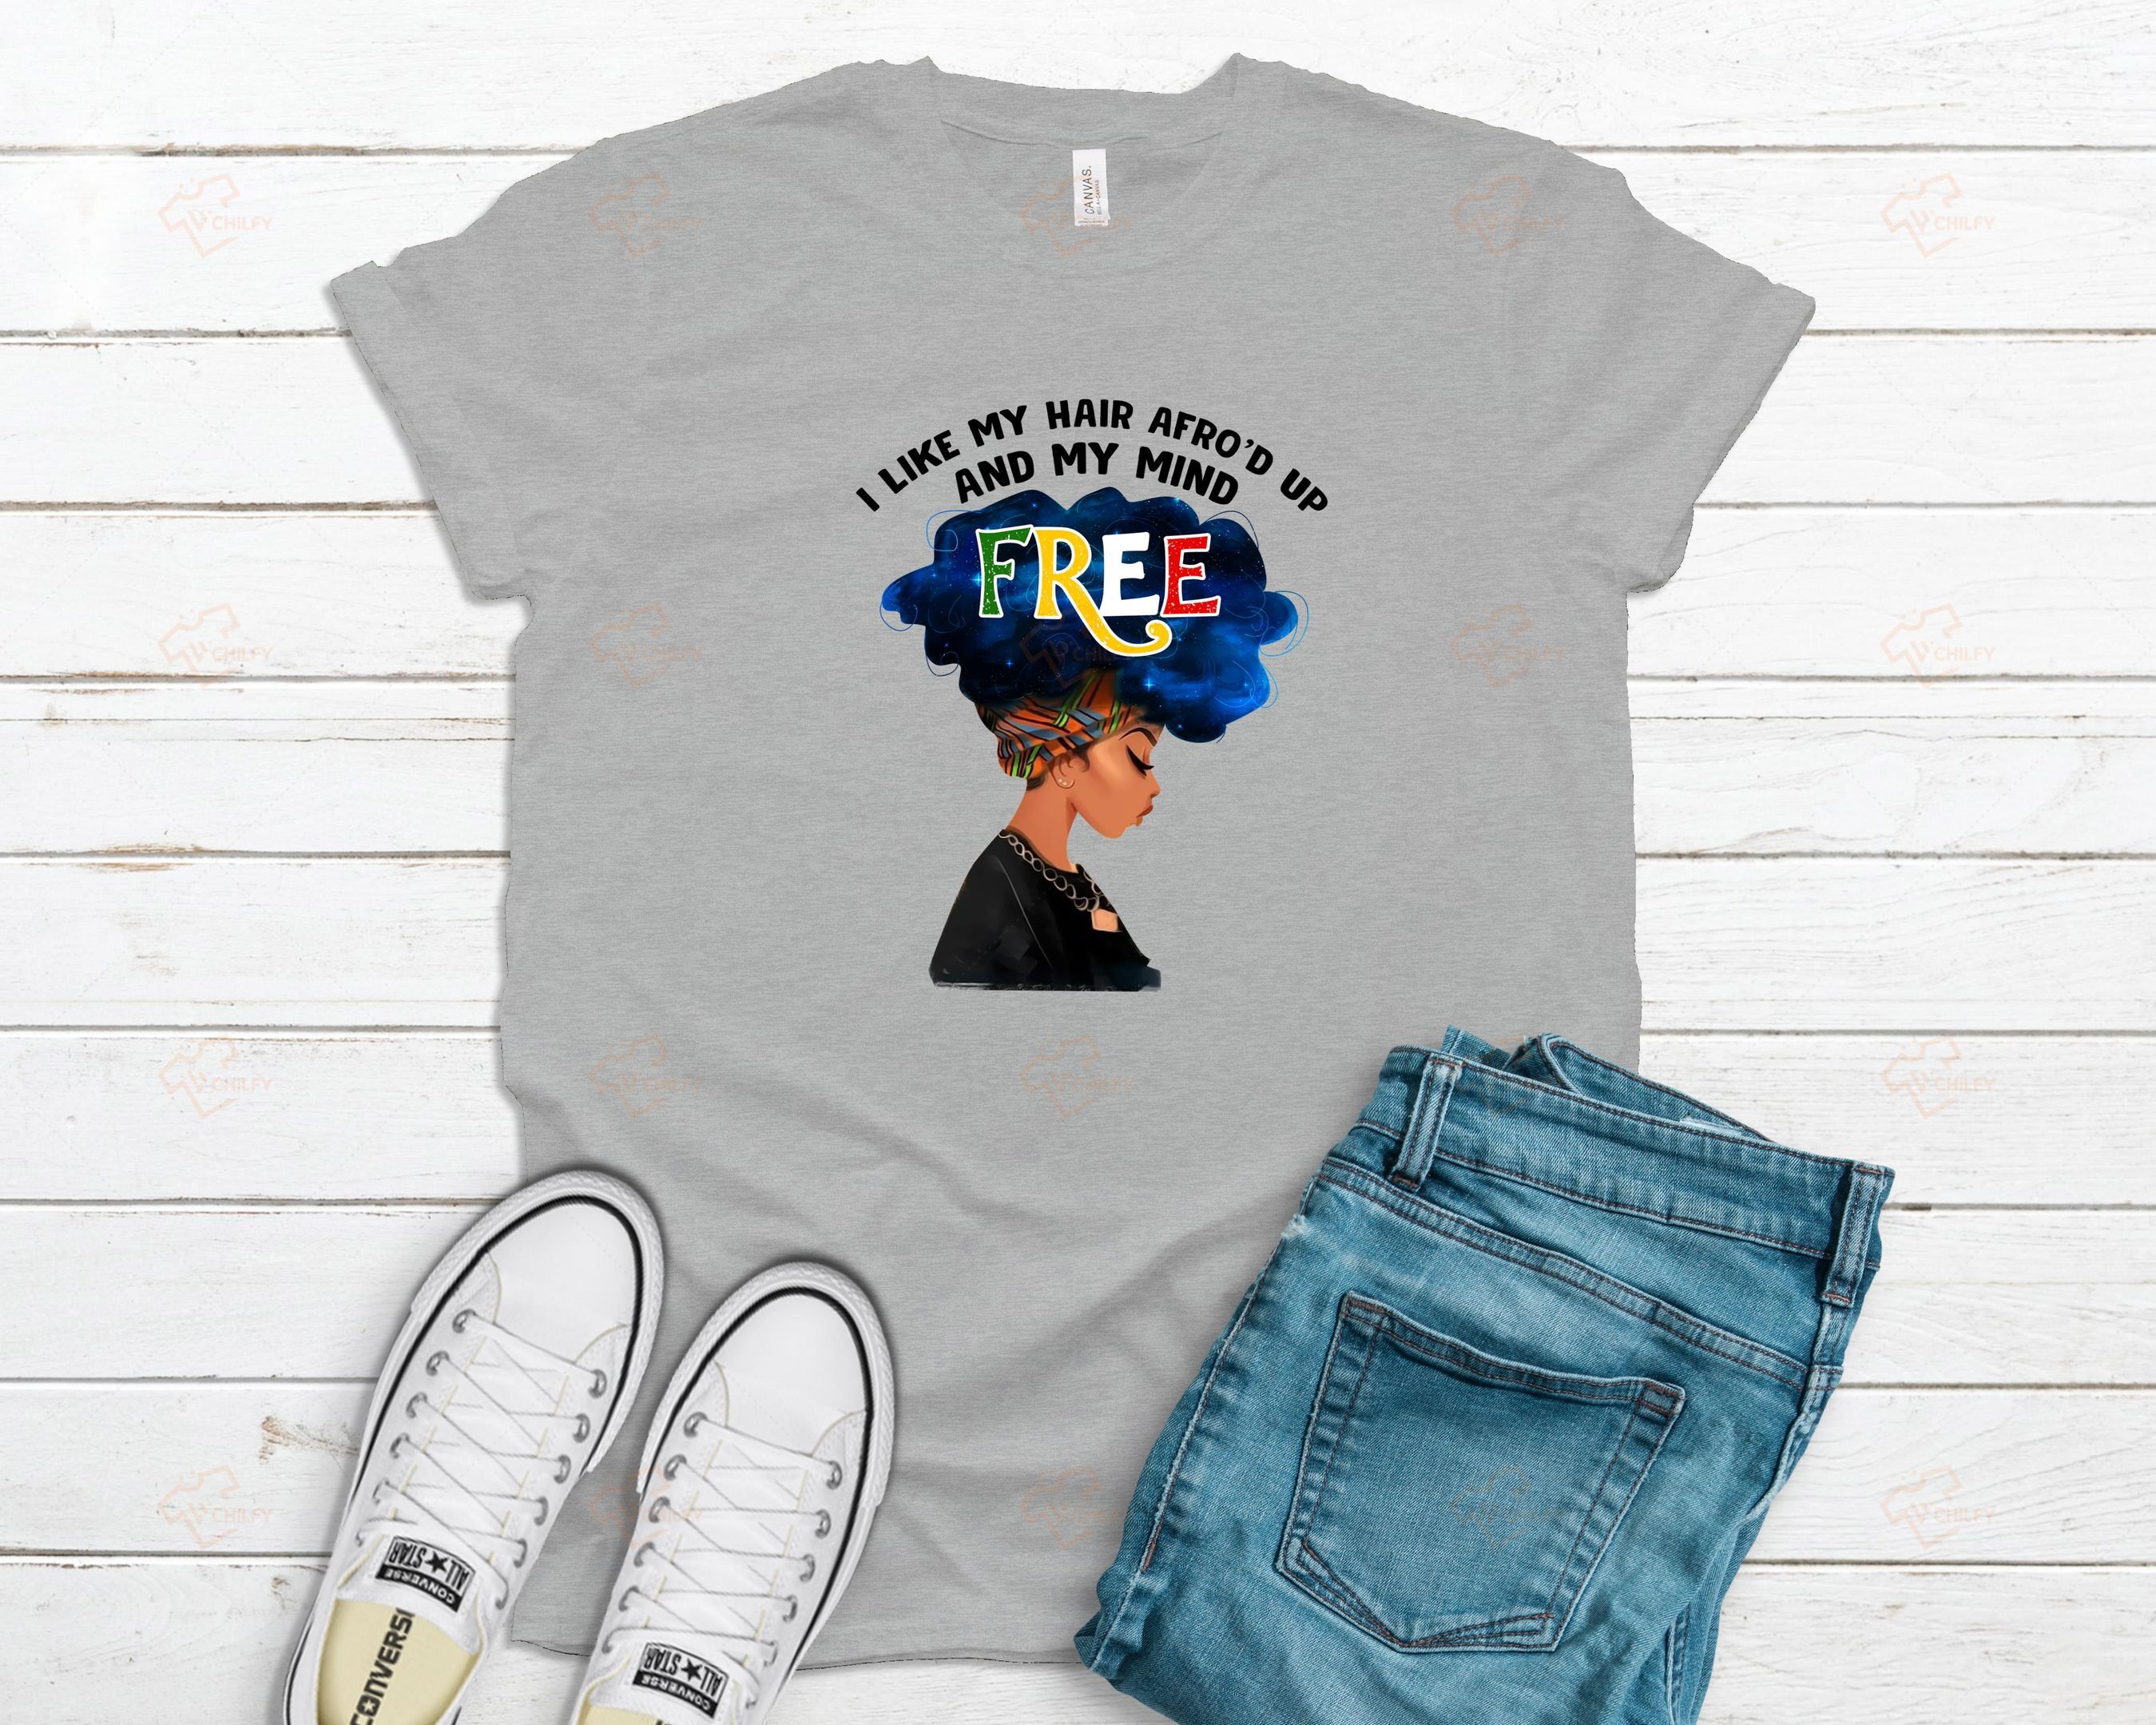 Afro girl shirt, I like my hair afro’d up and my mind free shirt